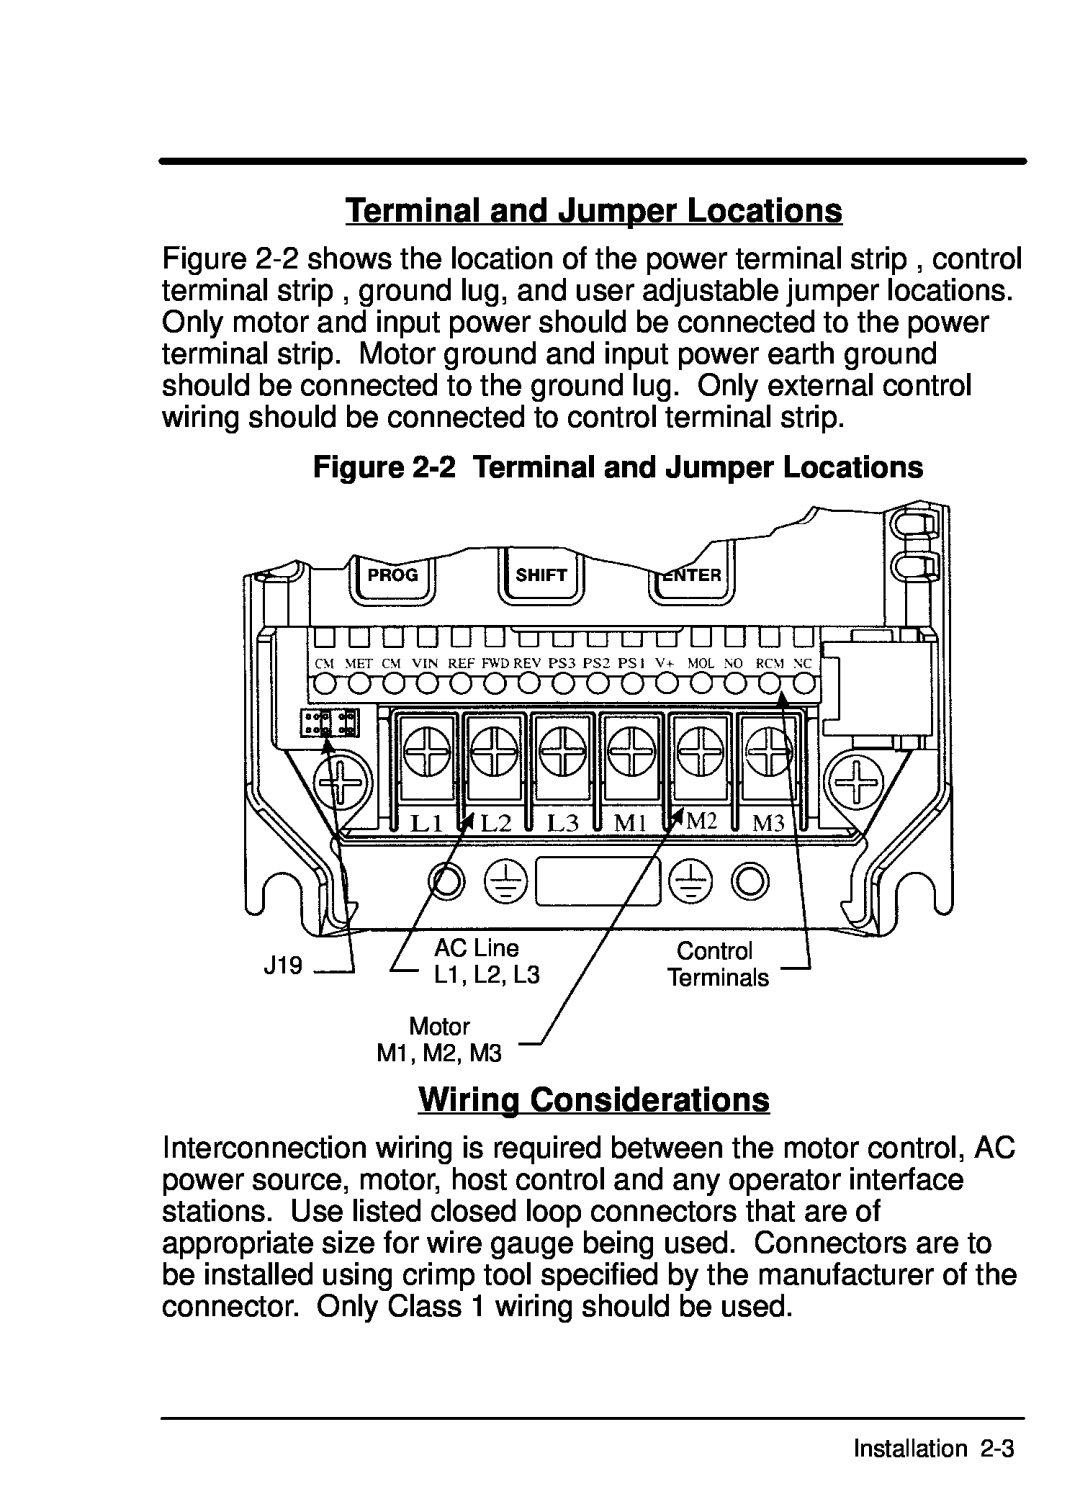 Baldor ID101F50-E manual Wiring Considerations, 2 Terminal and Jumper Locations 